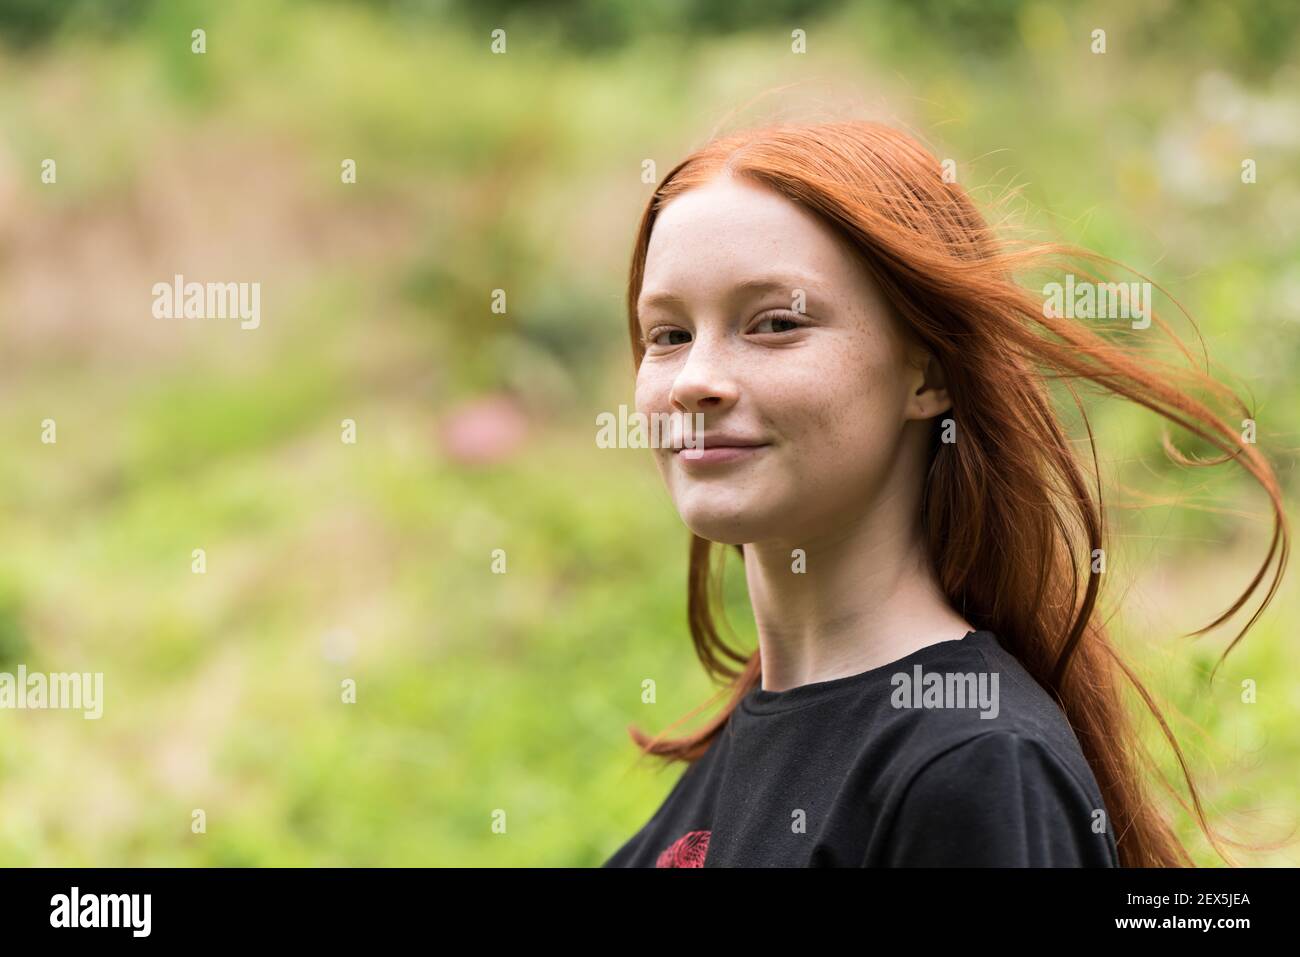 Red haired twelve year old girl with freckles posing with a nature bokeh background Stock Photo